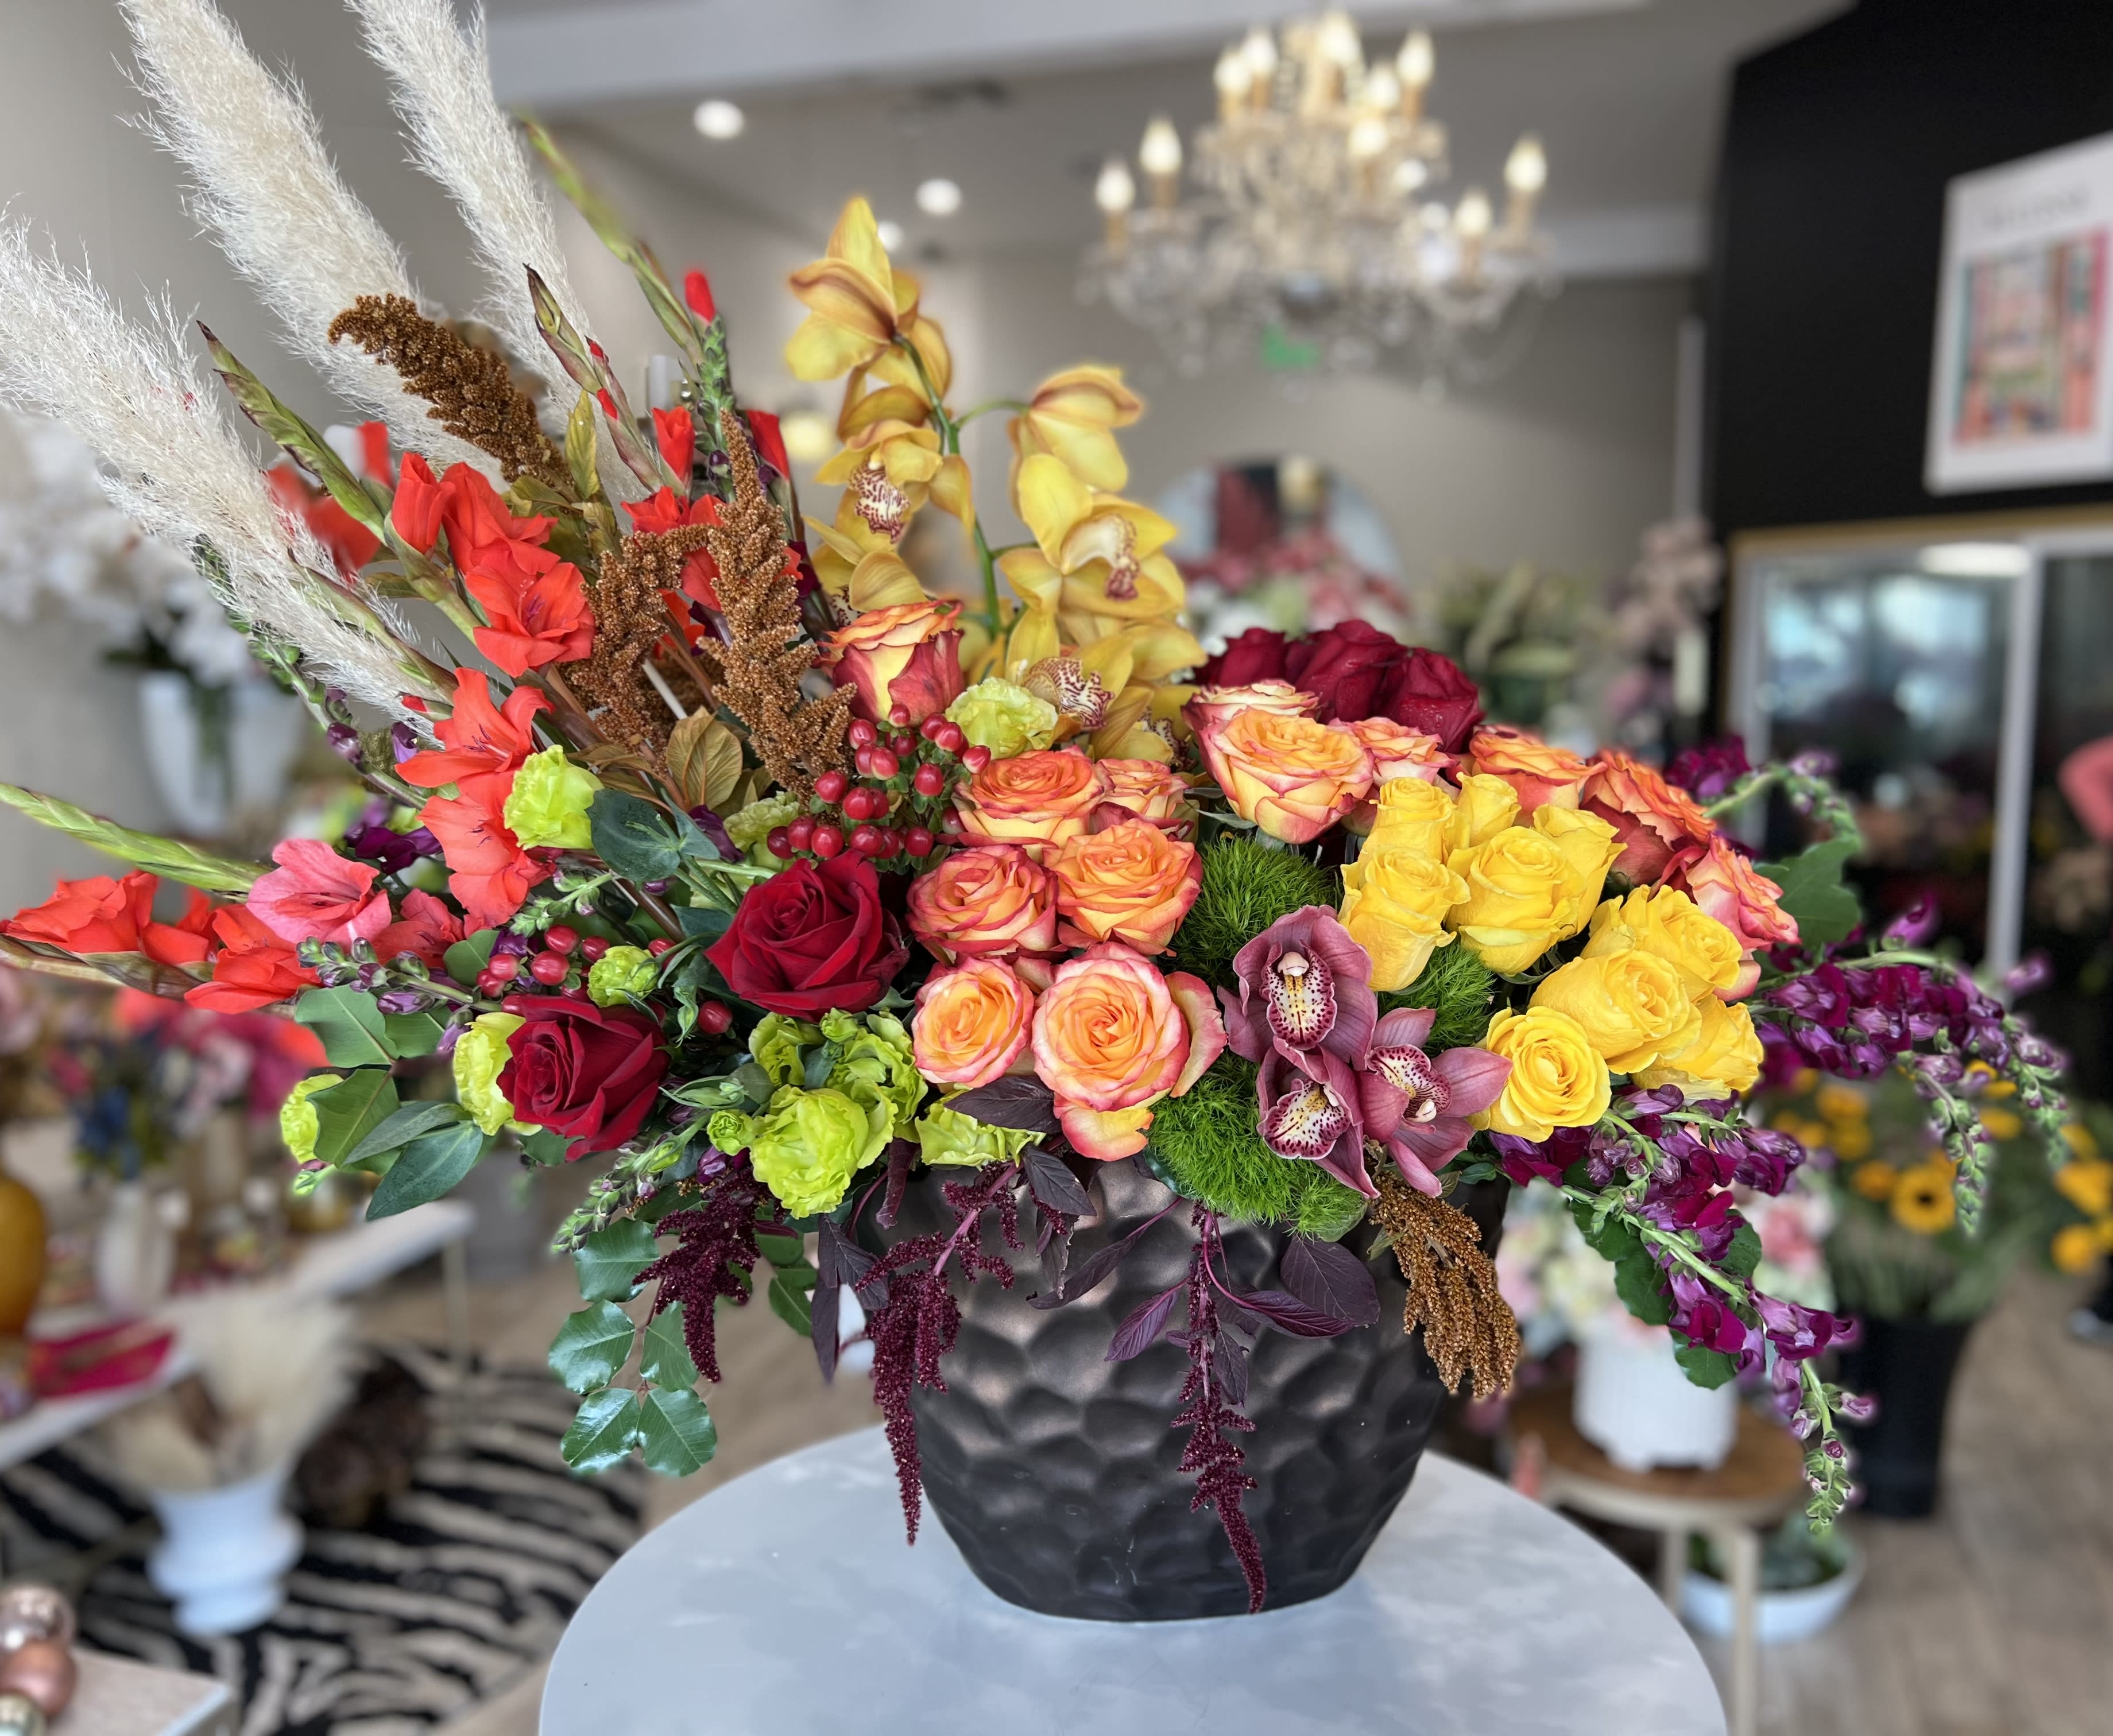 Magnificent  Jewel Tones - This jaw dropping arrangement includes dozens of roses, orchids, snap dragons, lisianthus and much more in a stunning bronze vase